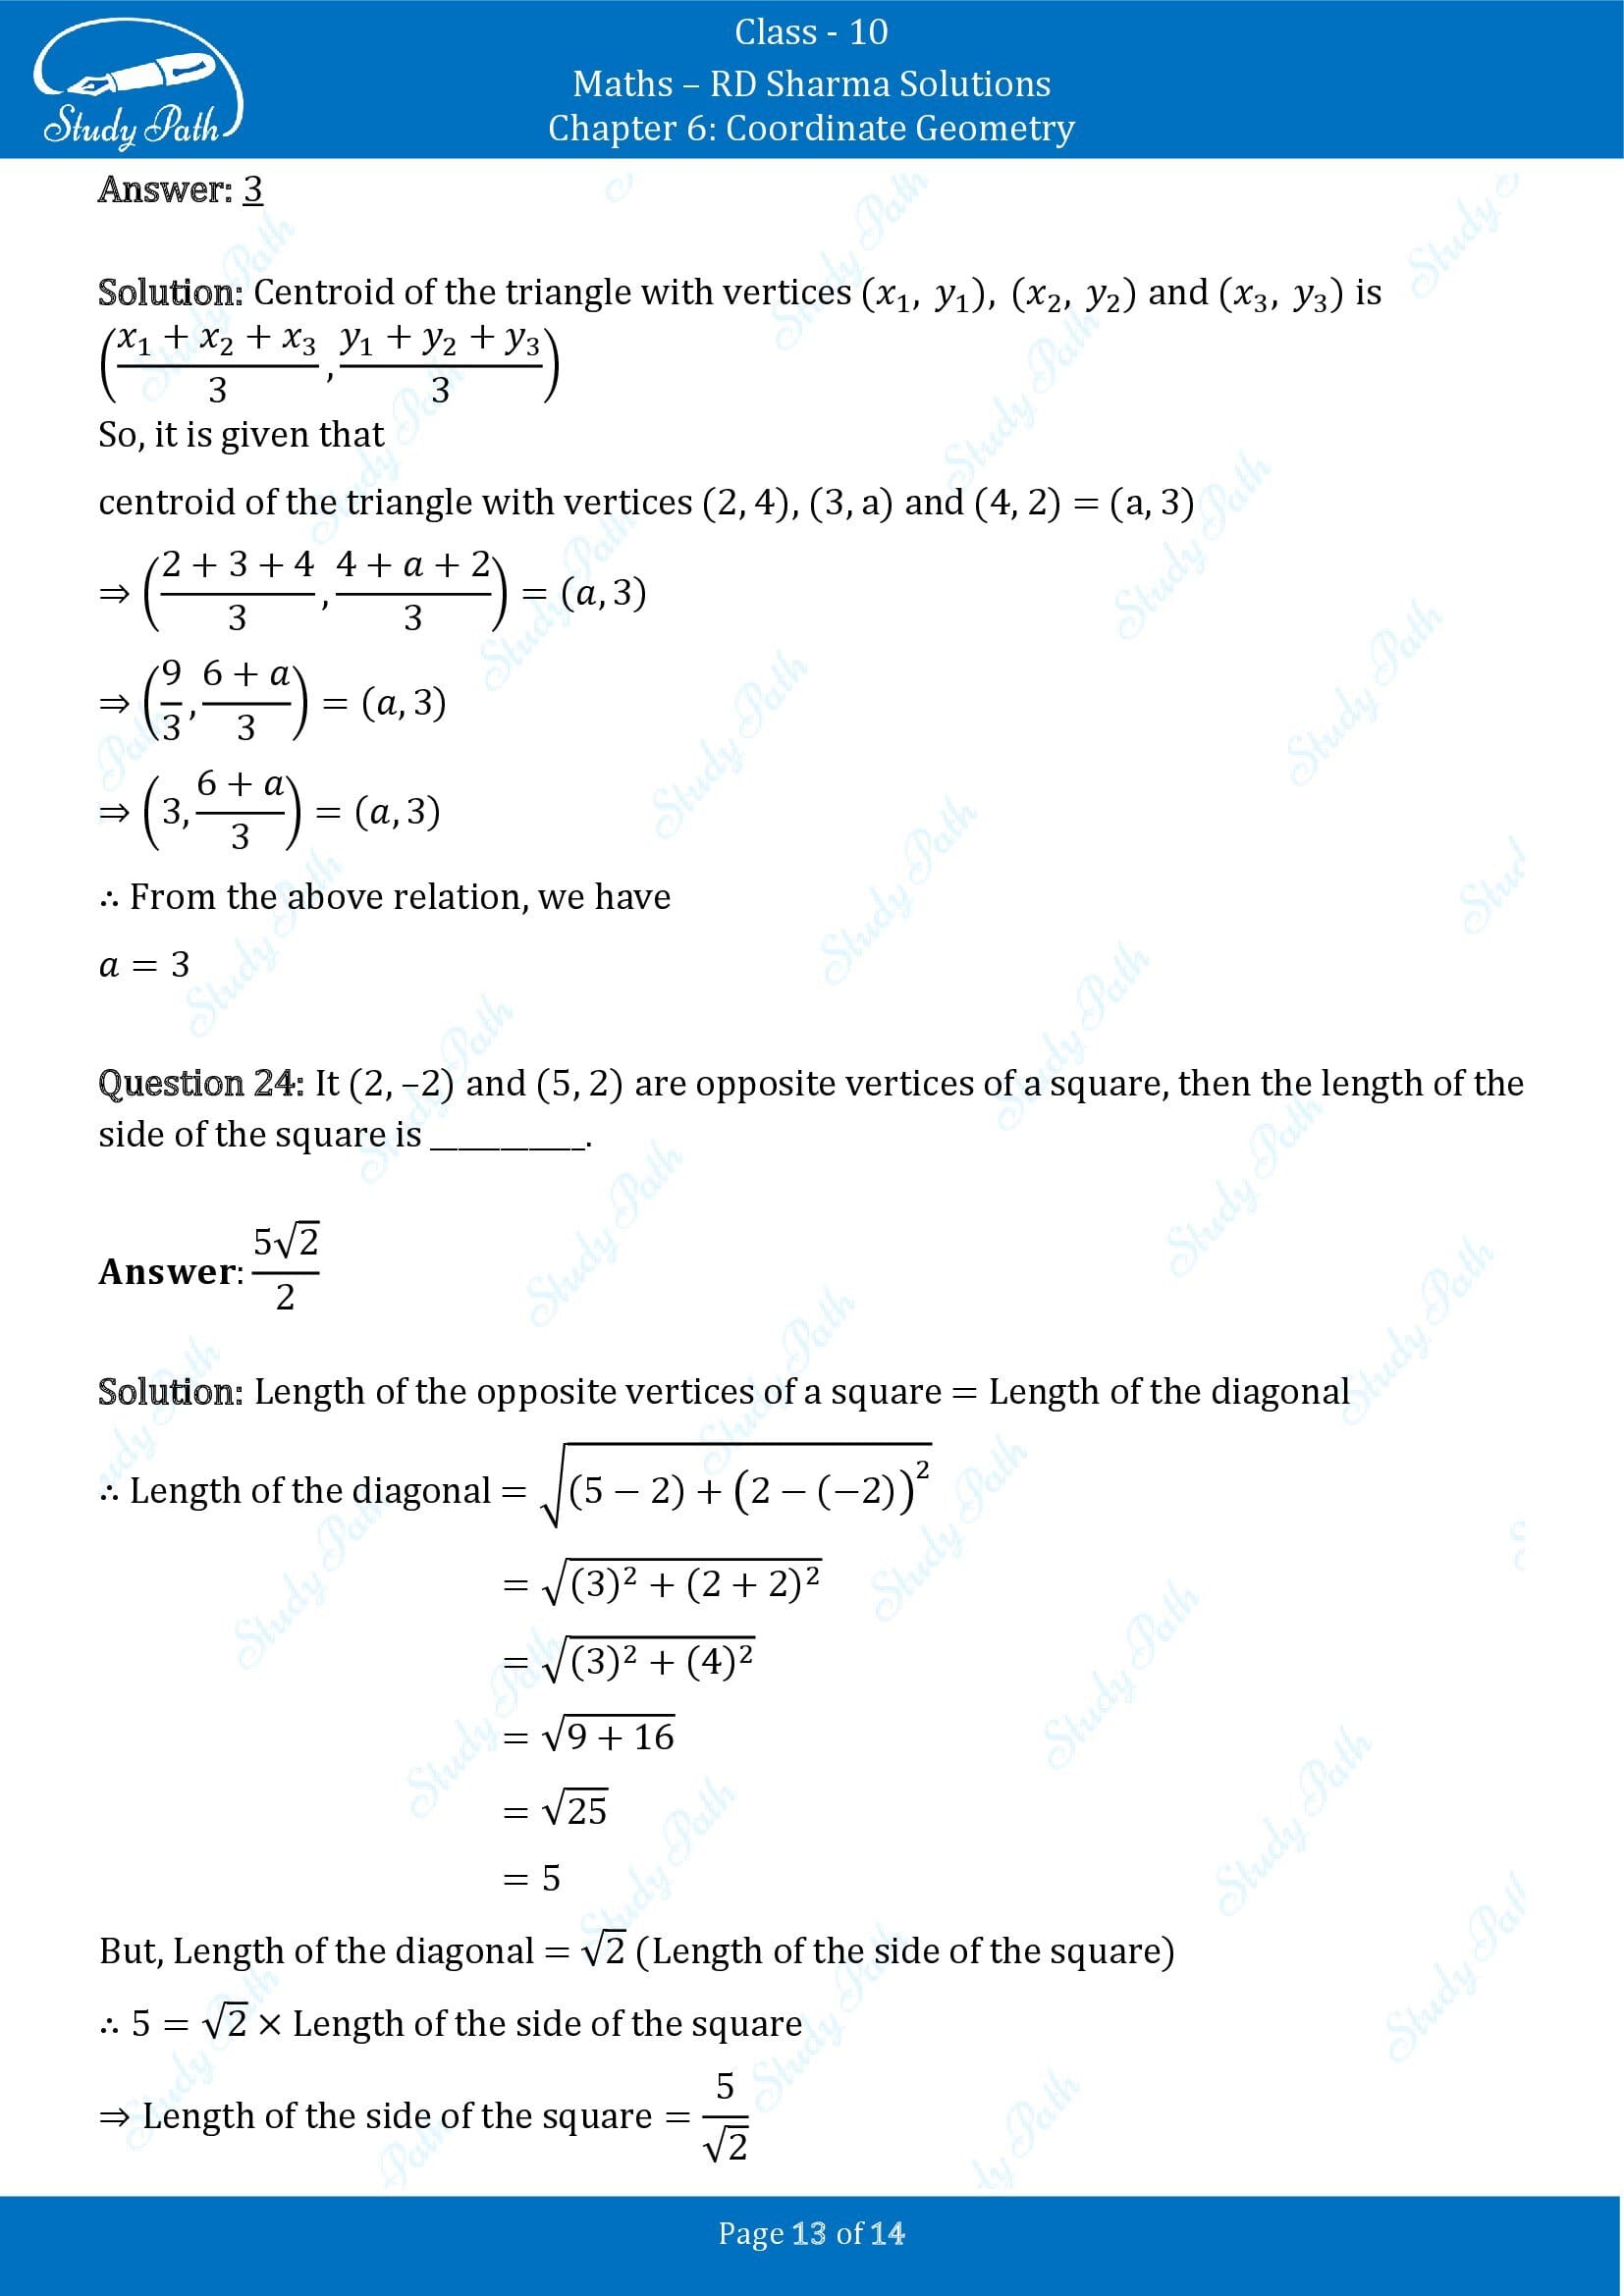 RD Sharma Solutions Class 10 Chapter 6 Coordinate Geometry Fill in the Blank Type Questions FBQs 00013